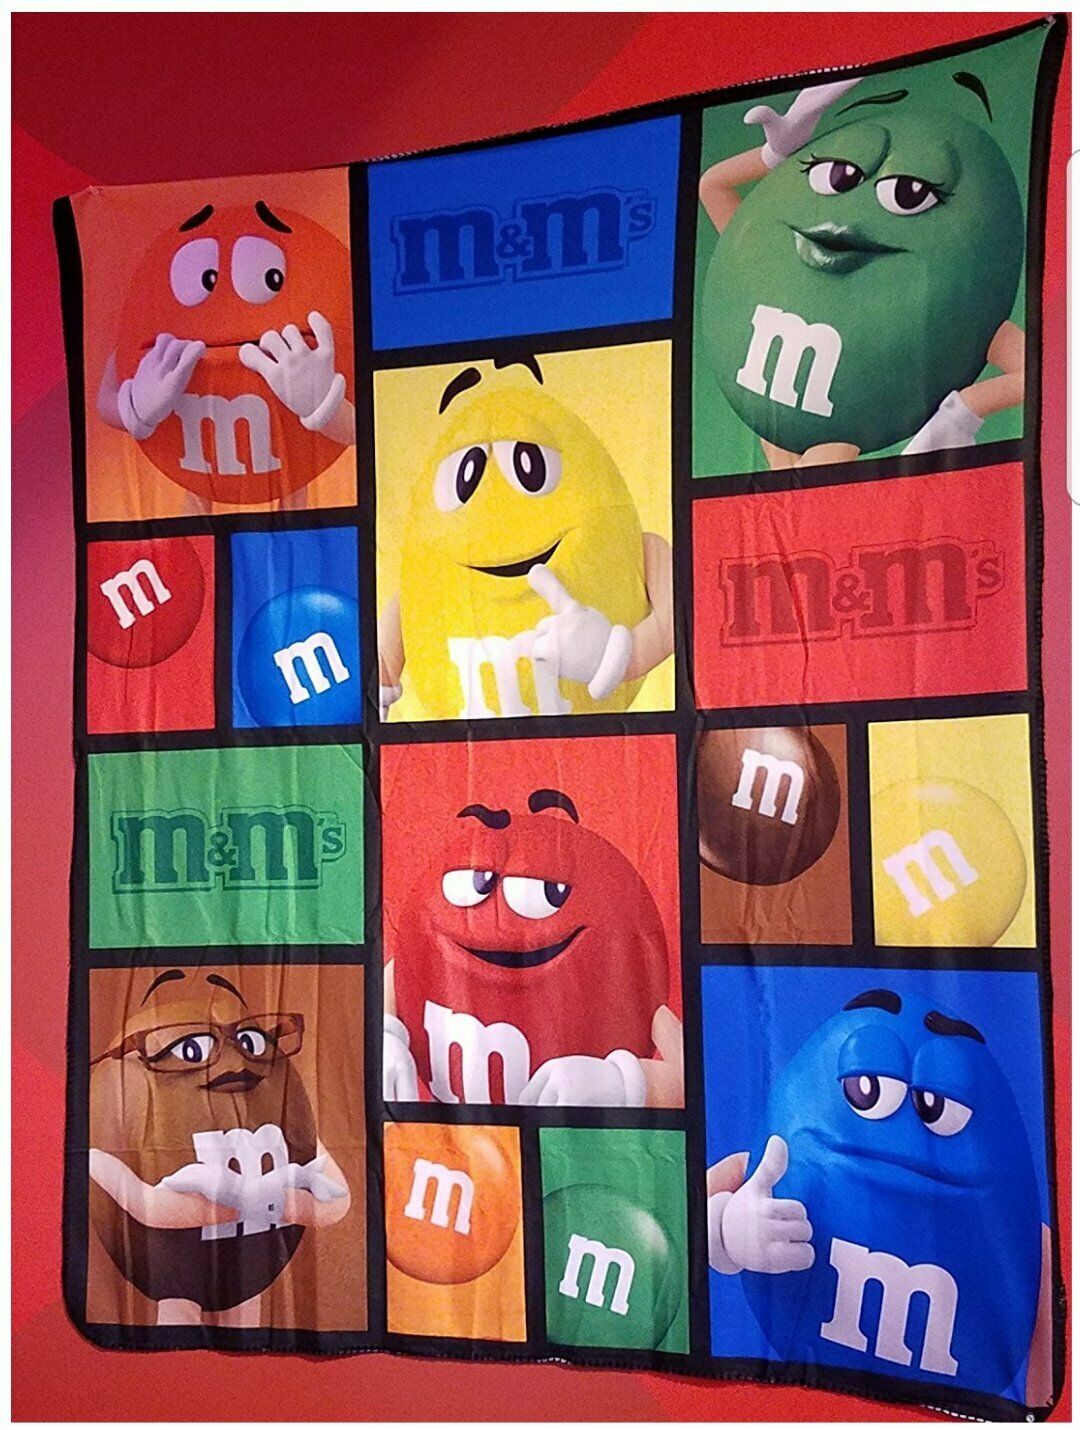 M&m Big Face Characters Blanket Throw W Blue Brown Green Red Orange & Yellow New